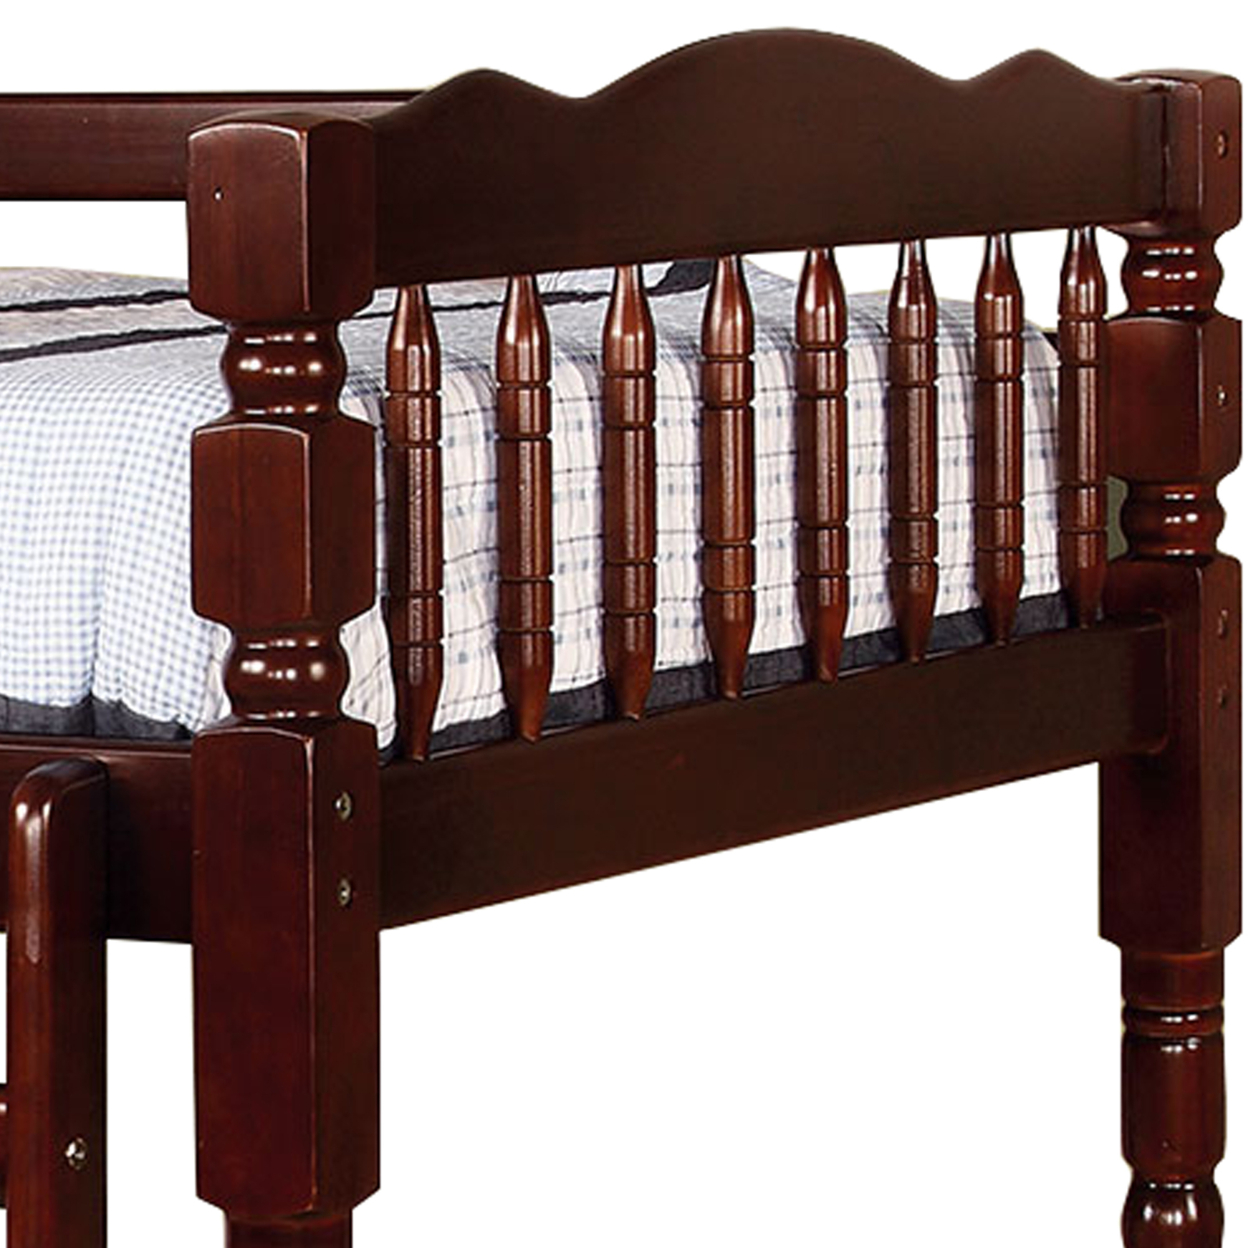 Traditional Bunk Bed With Attached Ladder And Turned Legs, Dark Brown- Saltoro Sherpi